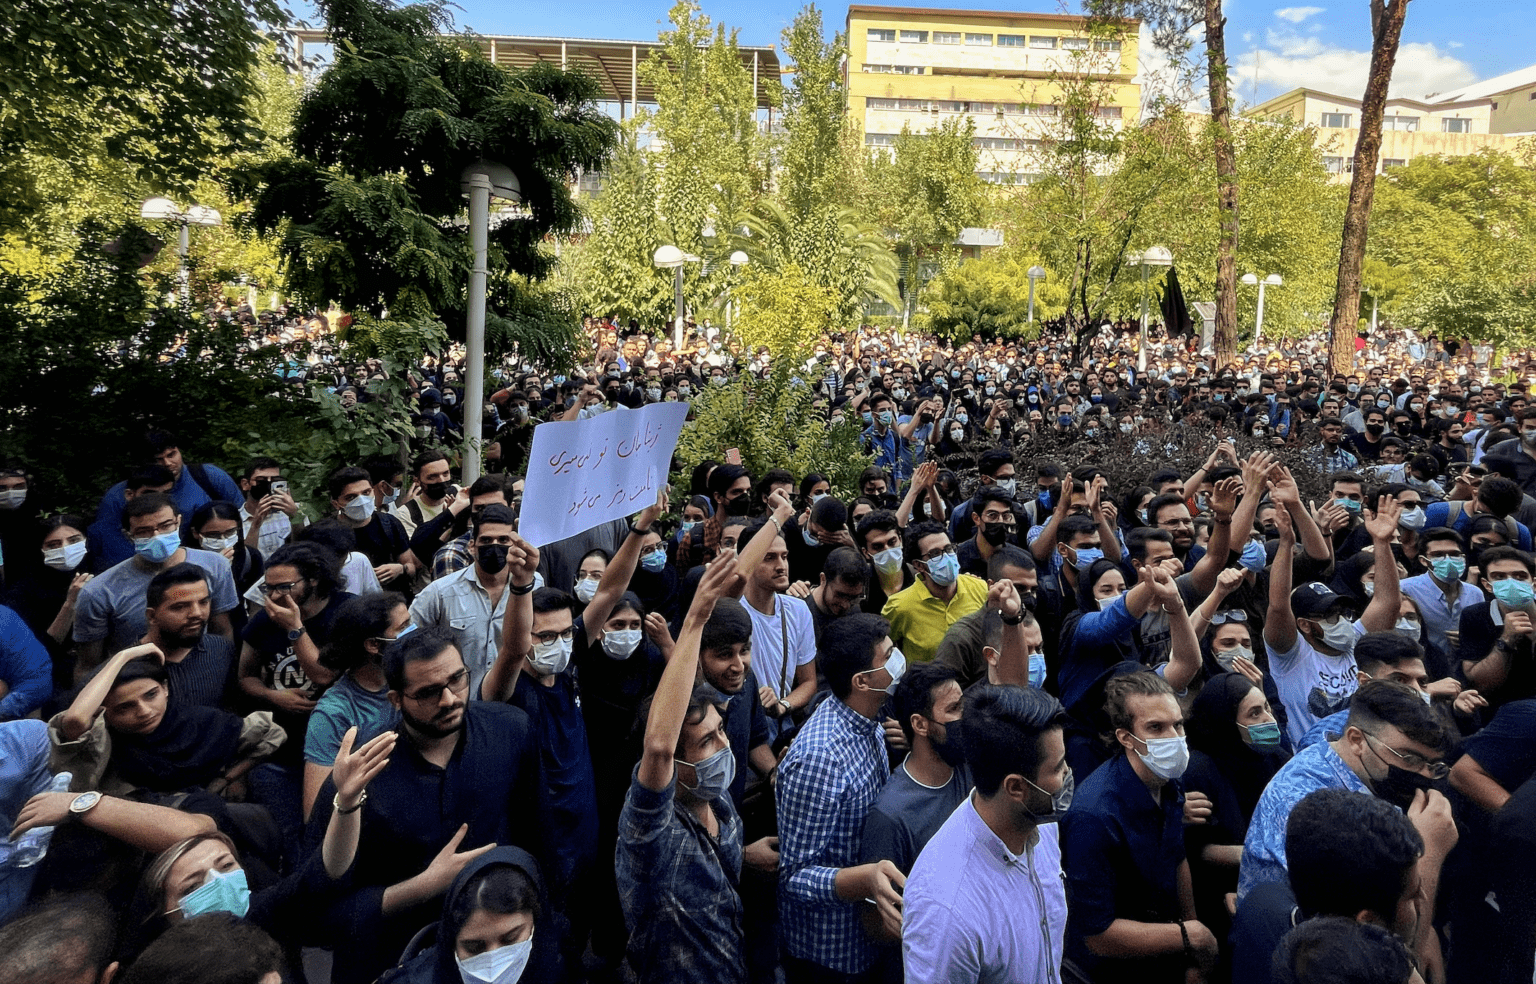 ￼Three Common Myths About Iran, the Morality Police, and the Mahsā  Amini Protests